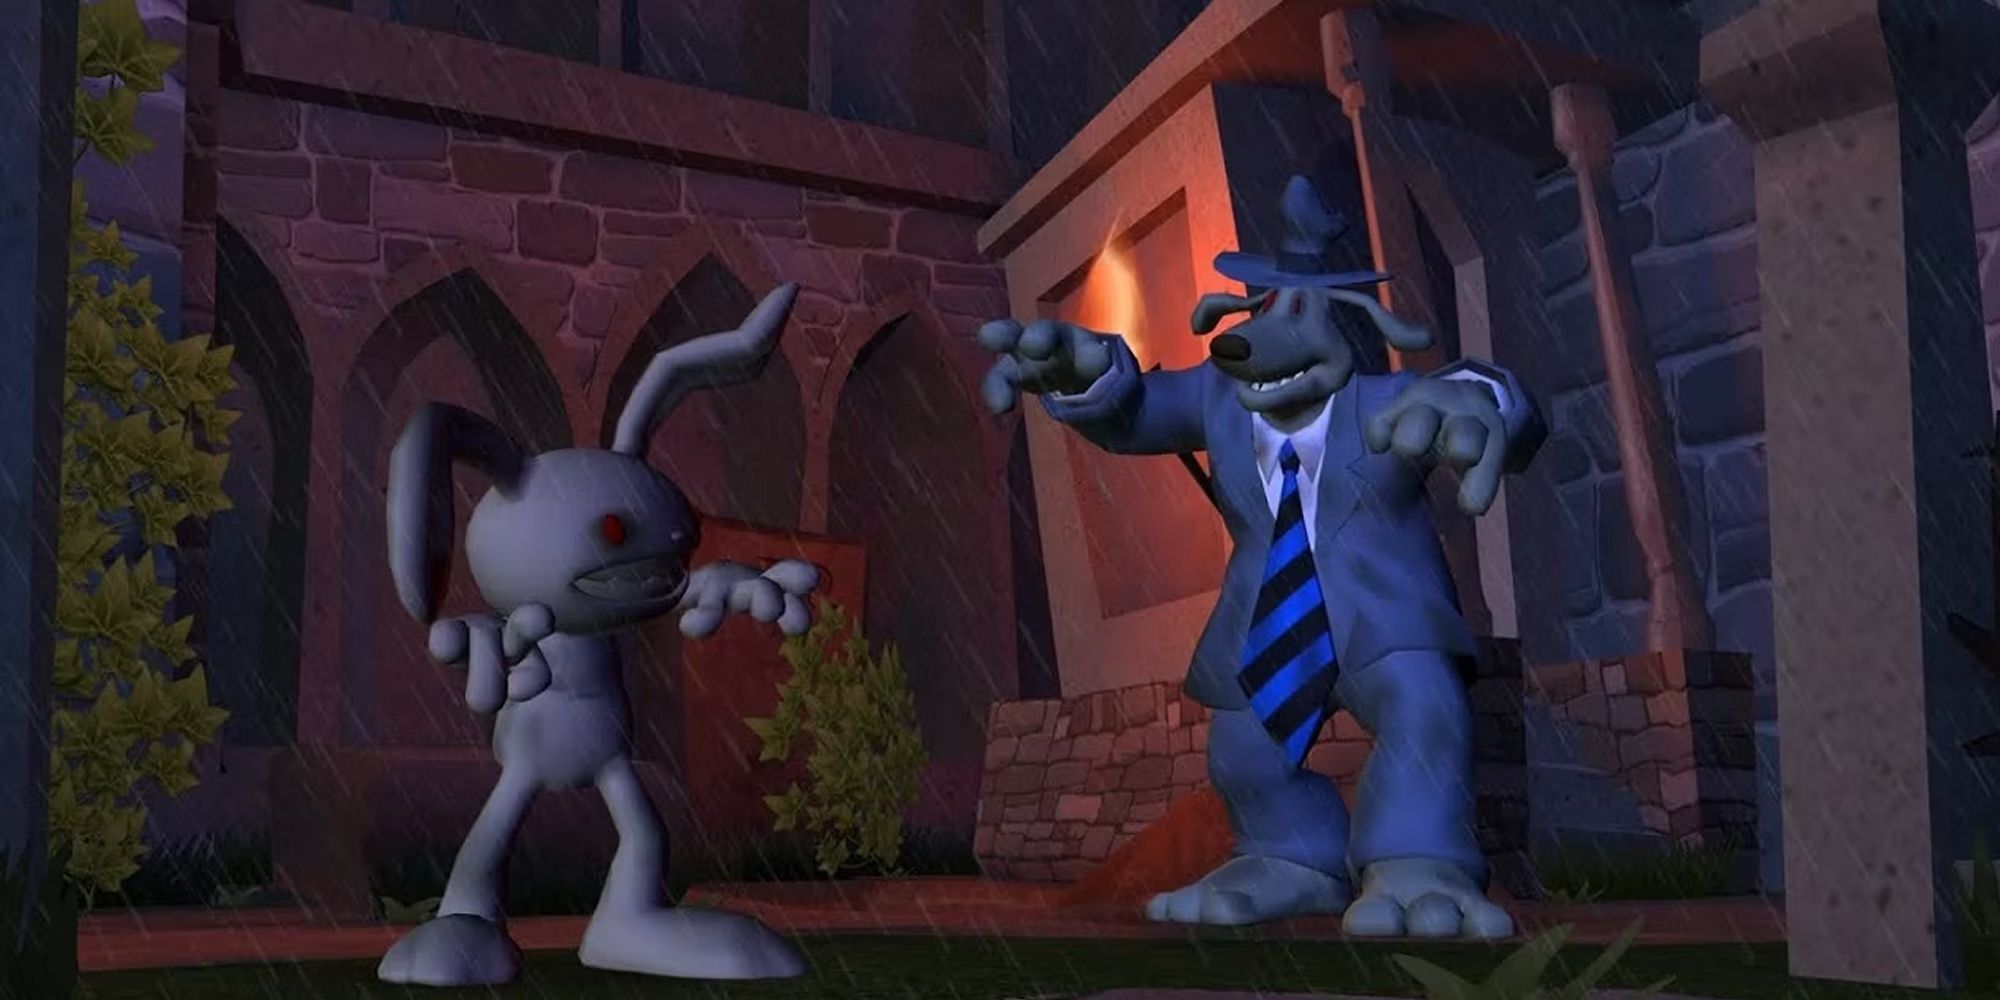 Sam And Max Appearing Possessed With Red Eyes